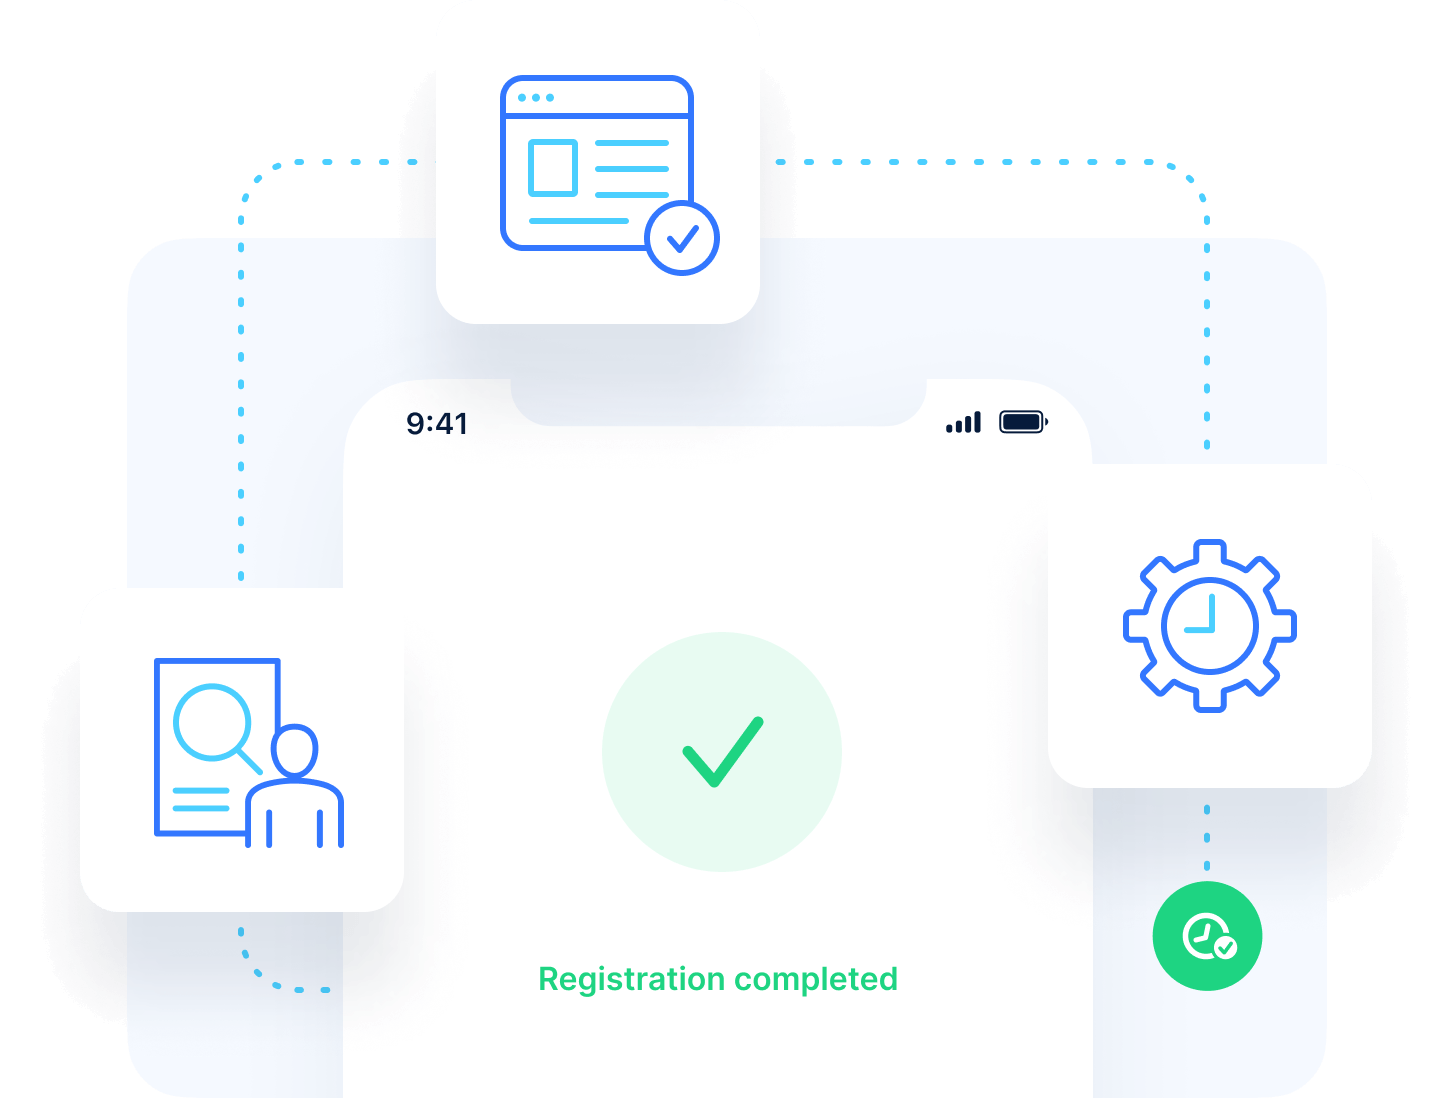 Instant user onboarding and verification